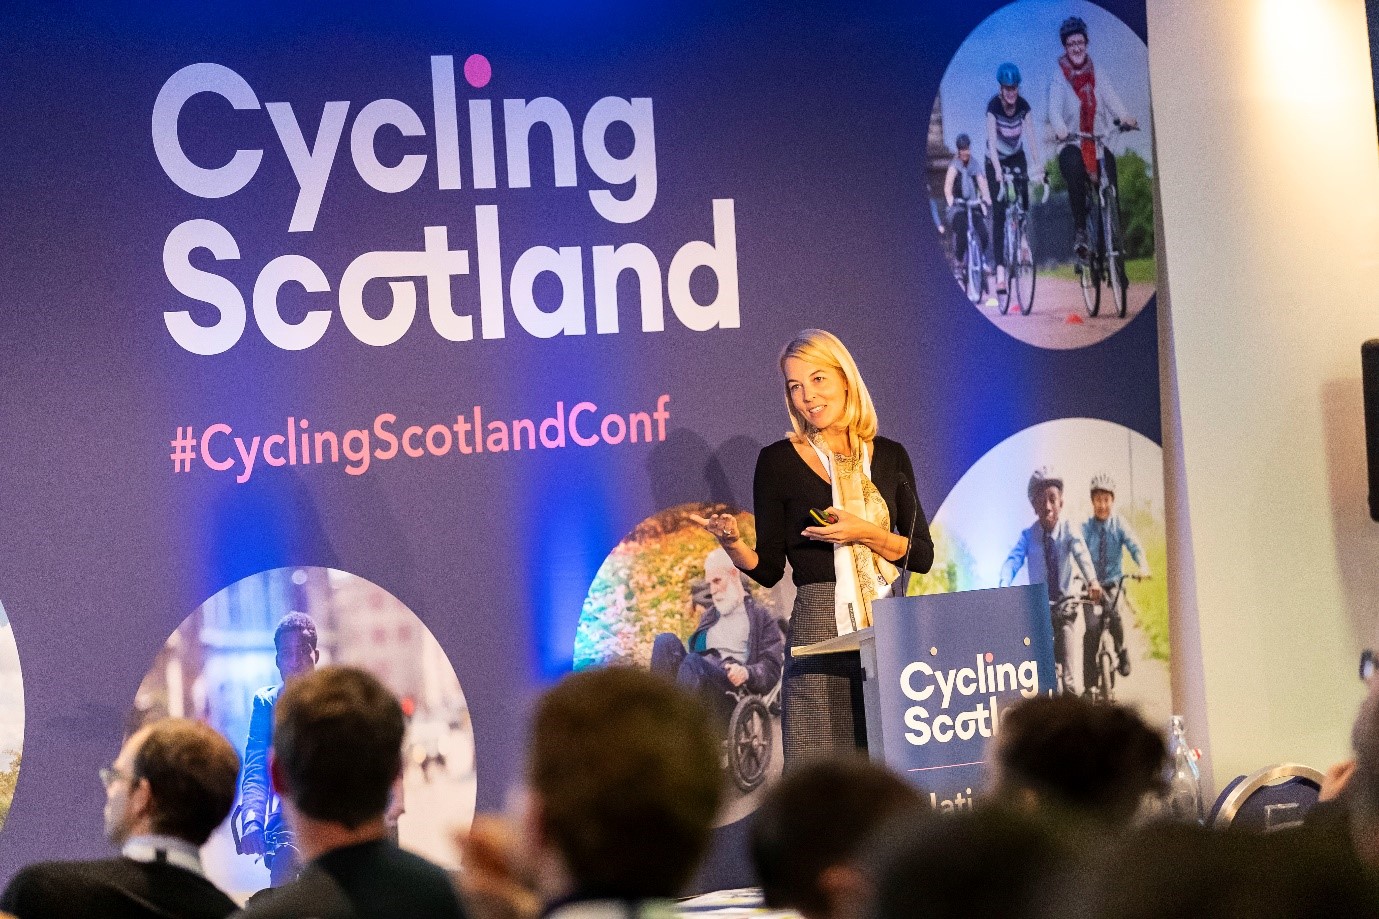 A person at a podium talking to people, with a purple background with white text reading Cycling Scotland